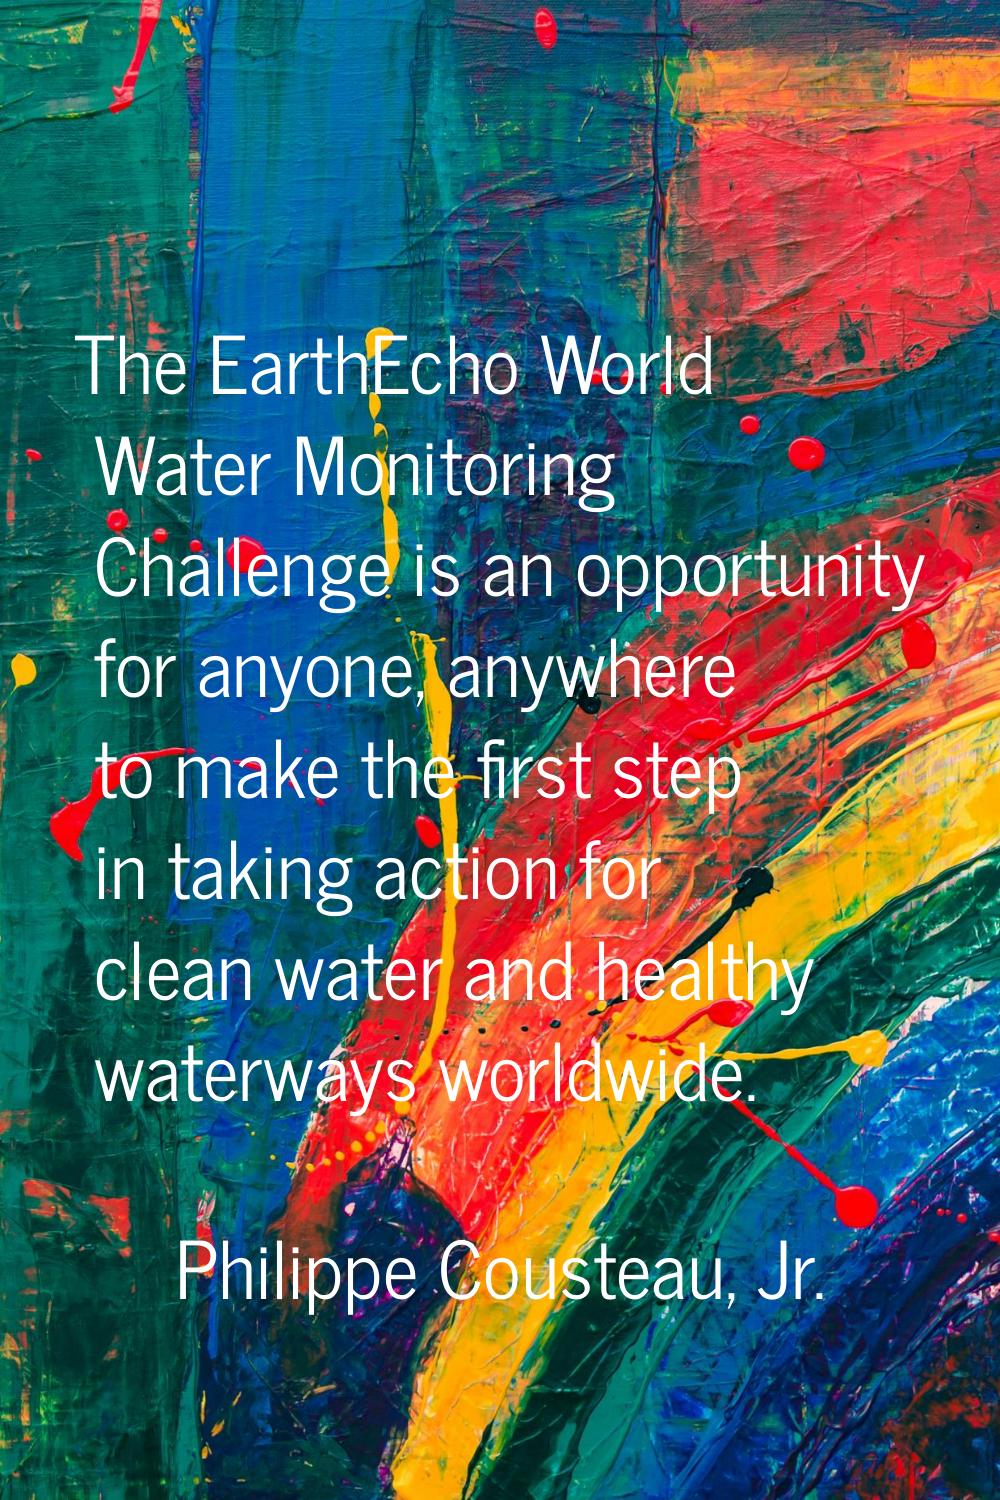 The EarthEcho World Water Monitoring Challenge is an opportunity for anyone, anywhere to make the f